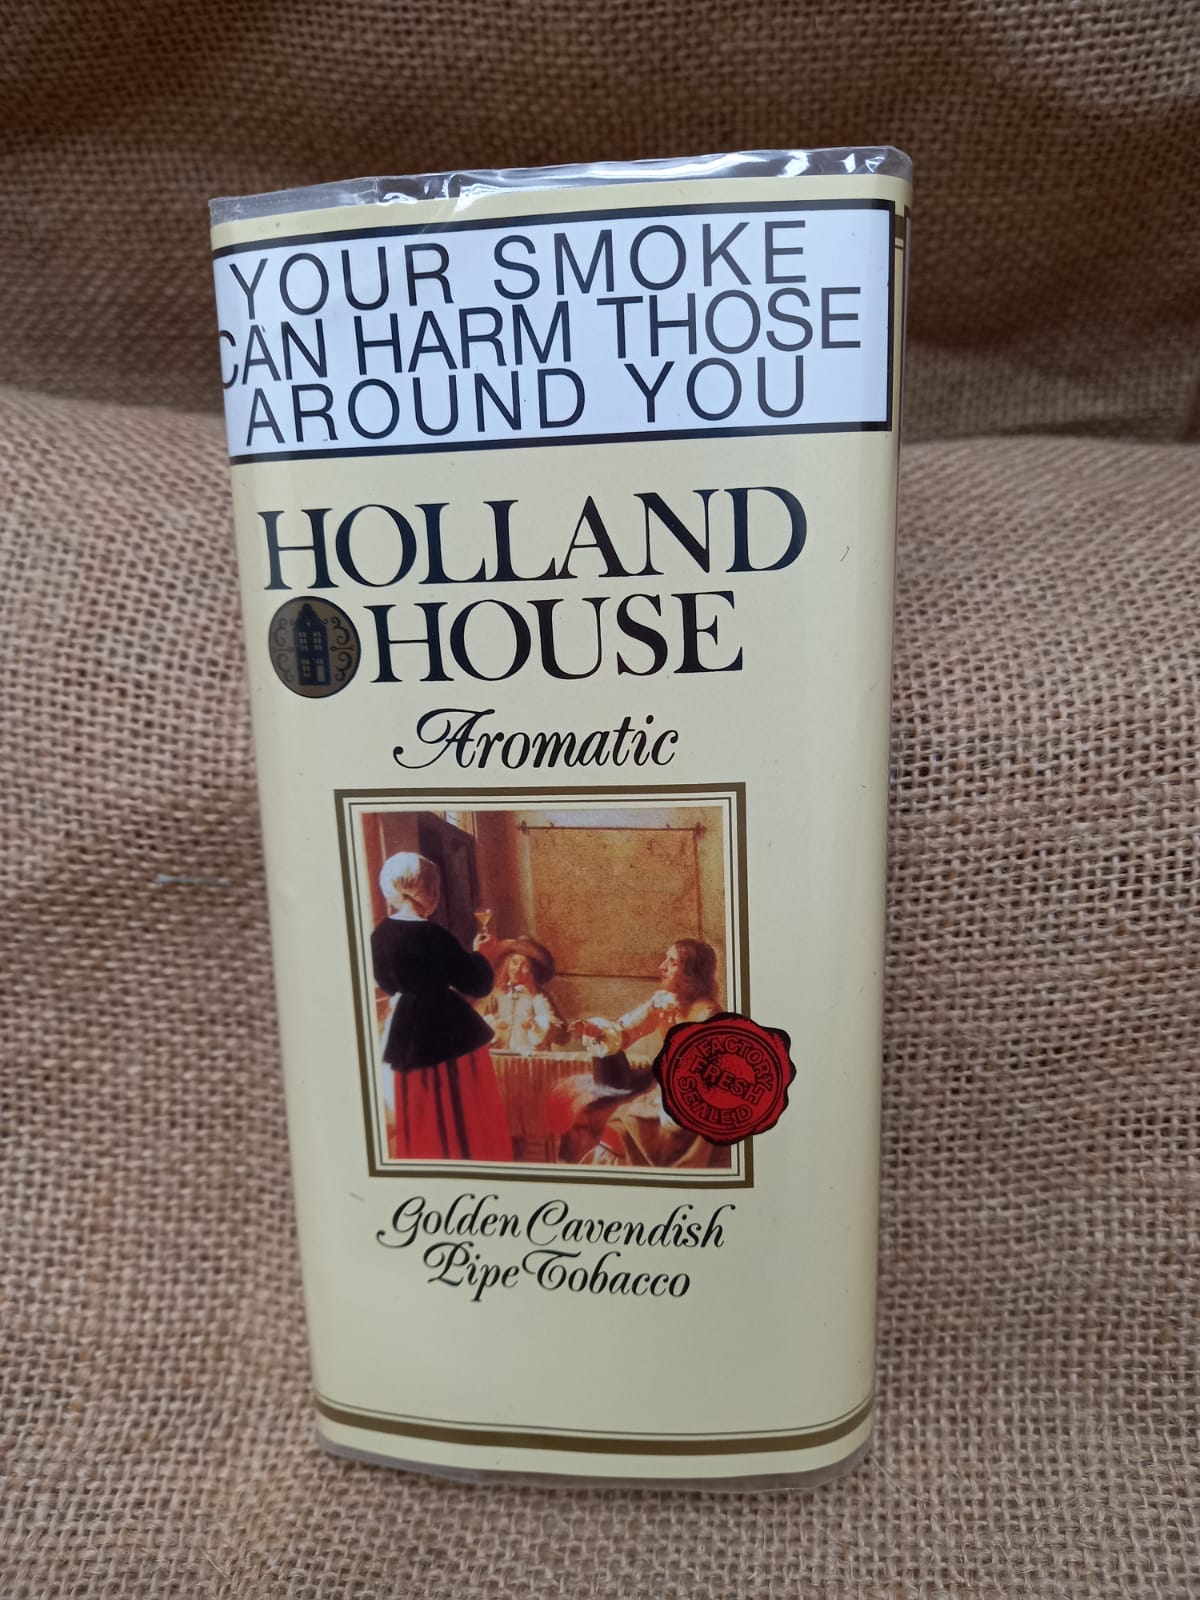 PIPE TOBACCO PER PACKET